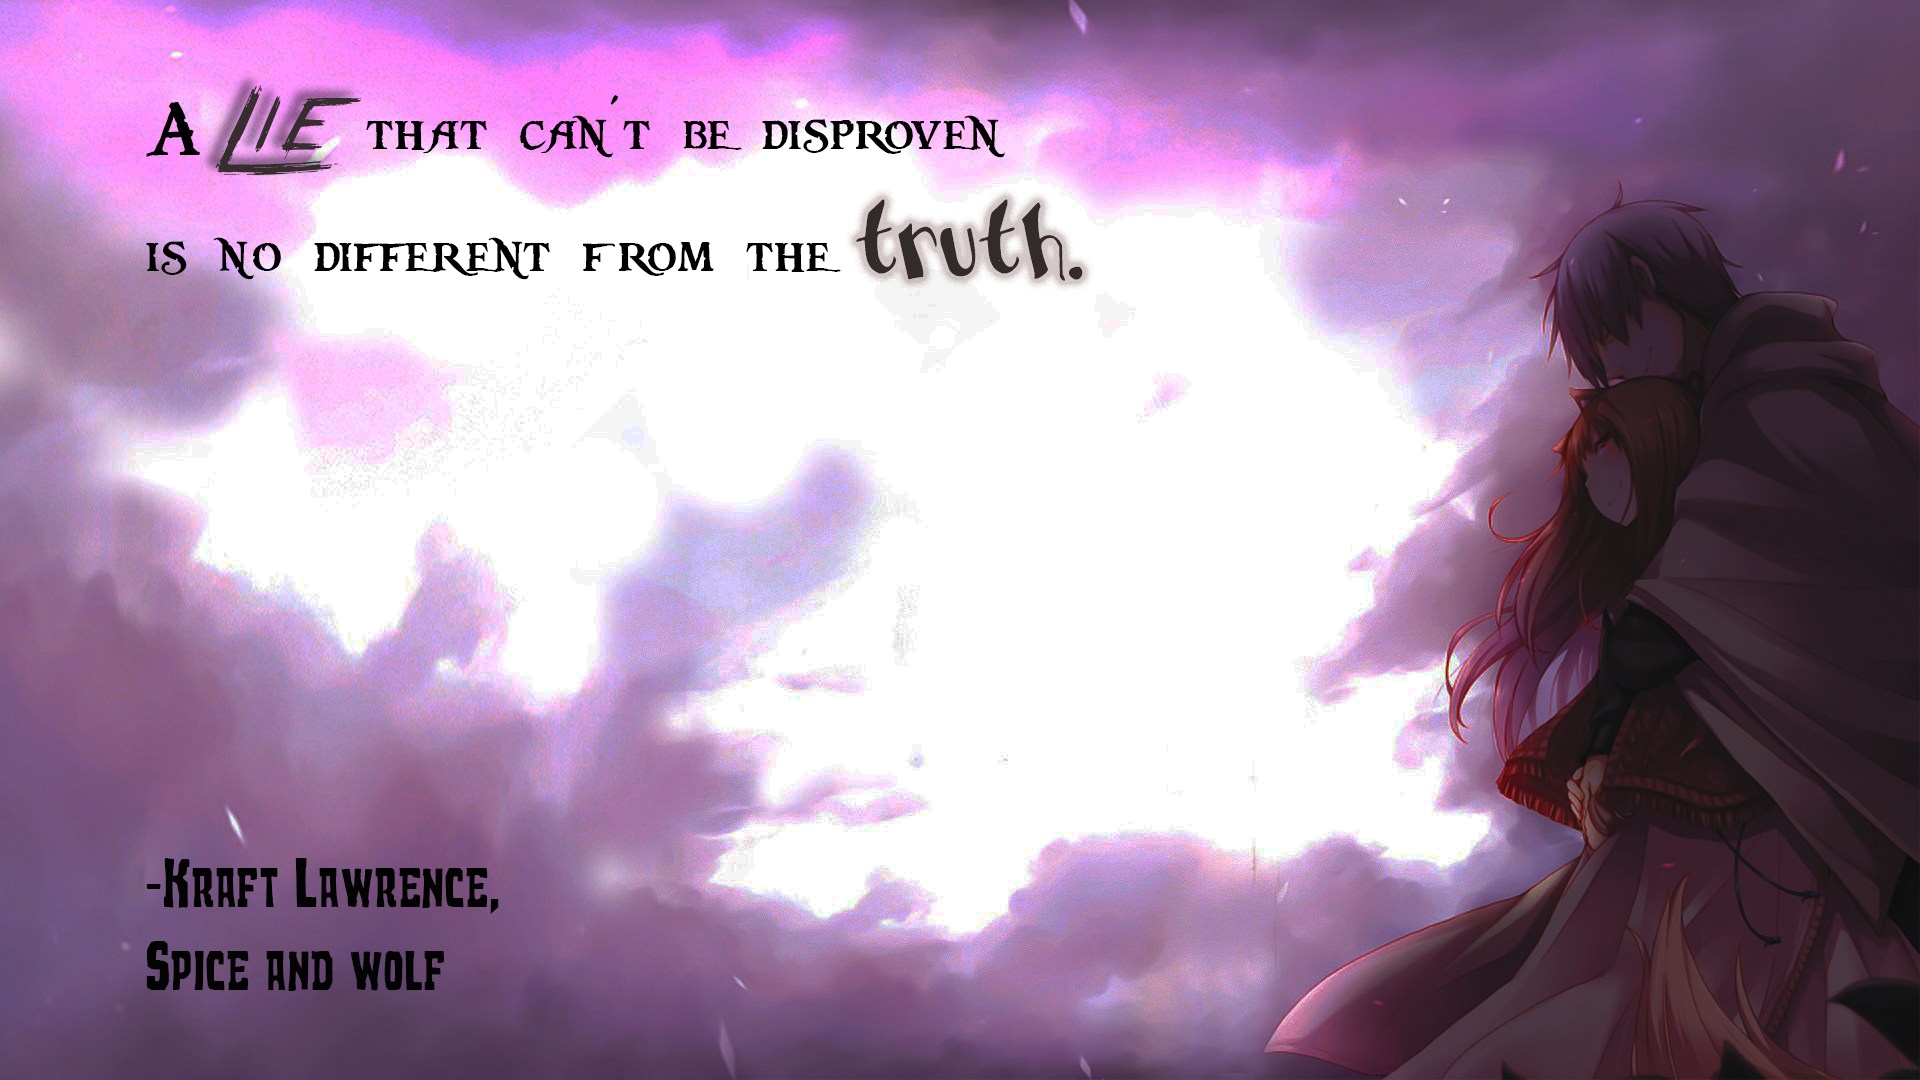 Quote Spice And Wolf Lawrence Kraft Anime Artwork Typography Anime Girls Anime Boys Holo Spice And W 1920x1080